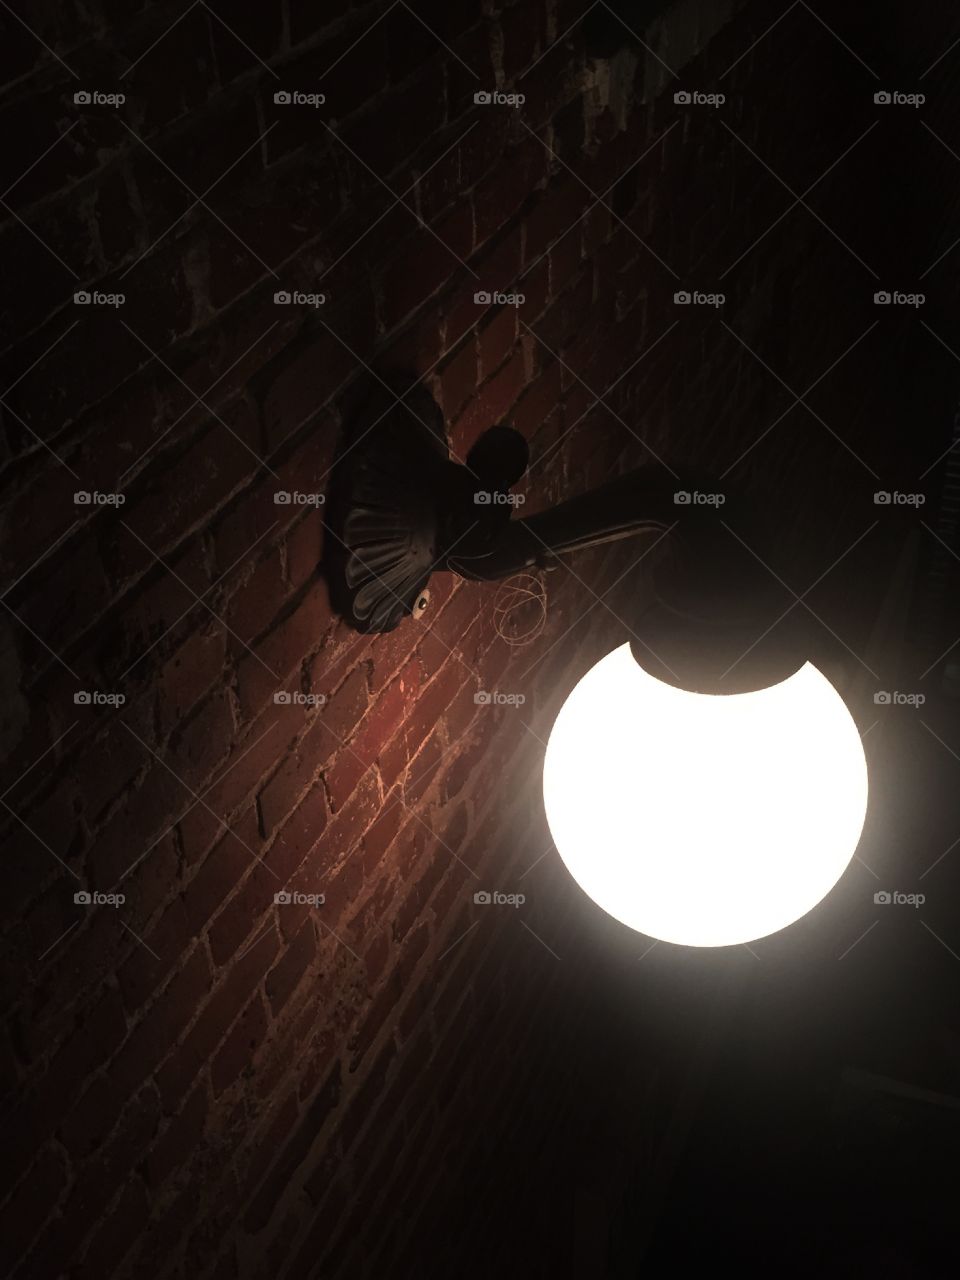 Illuminating brick. Inside of old brick building with old lamp light 